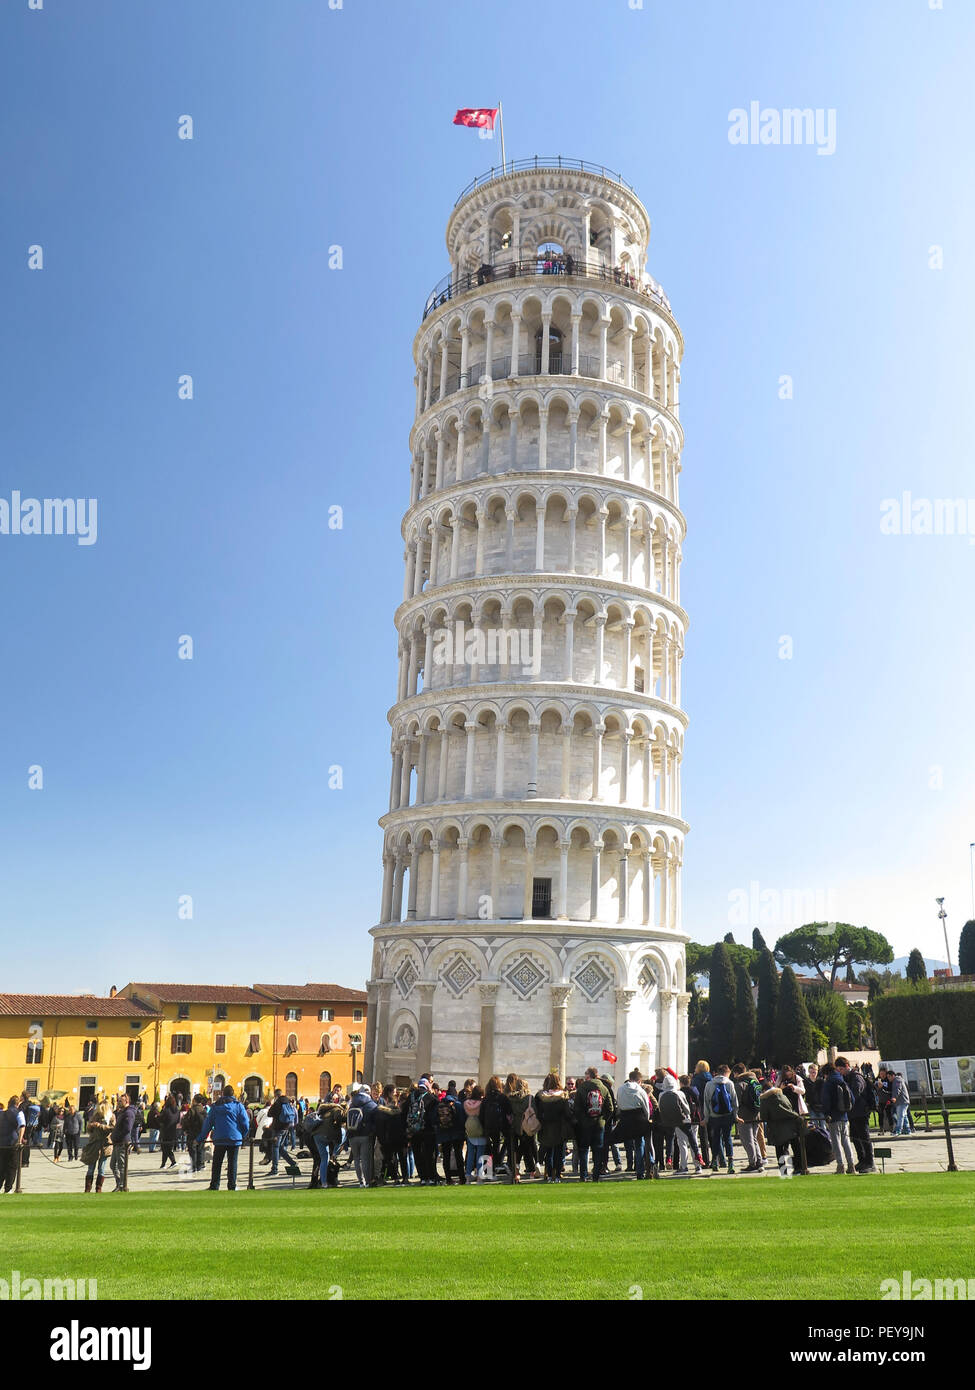 Leaning tower of Pisa Stock Photo